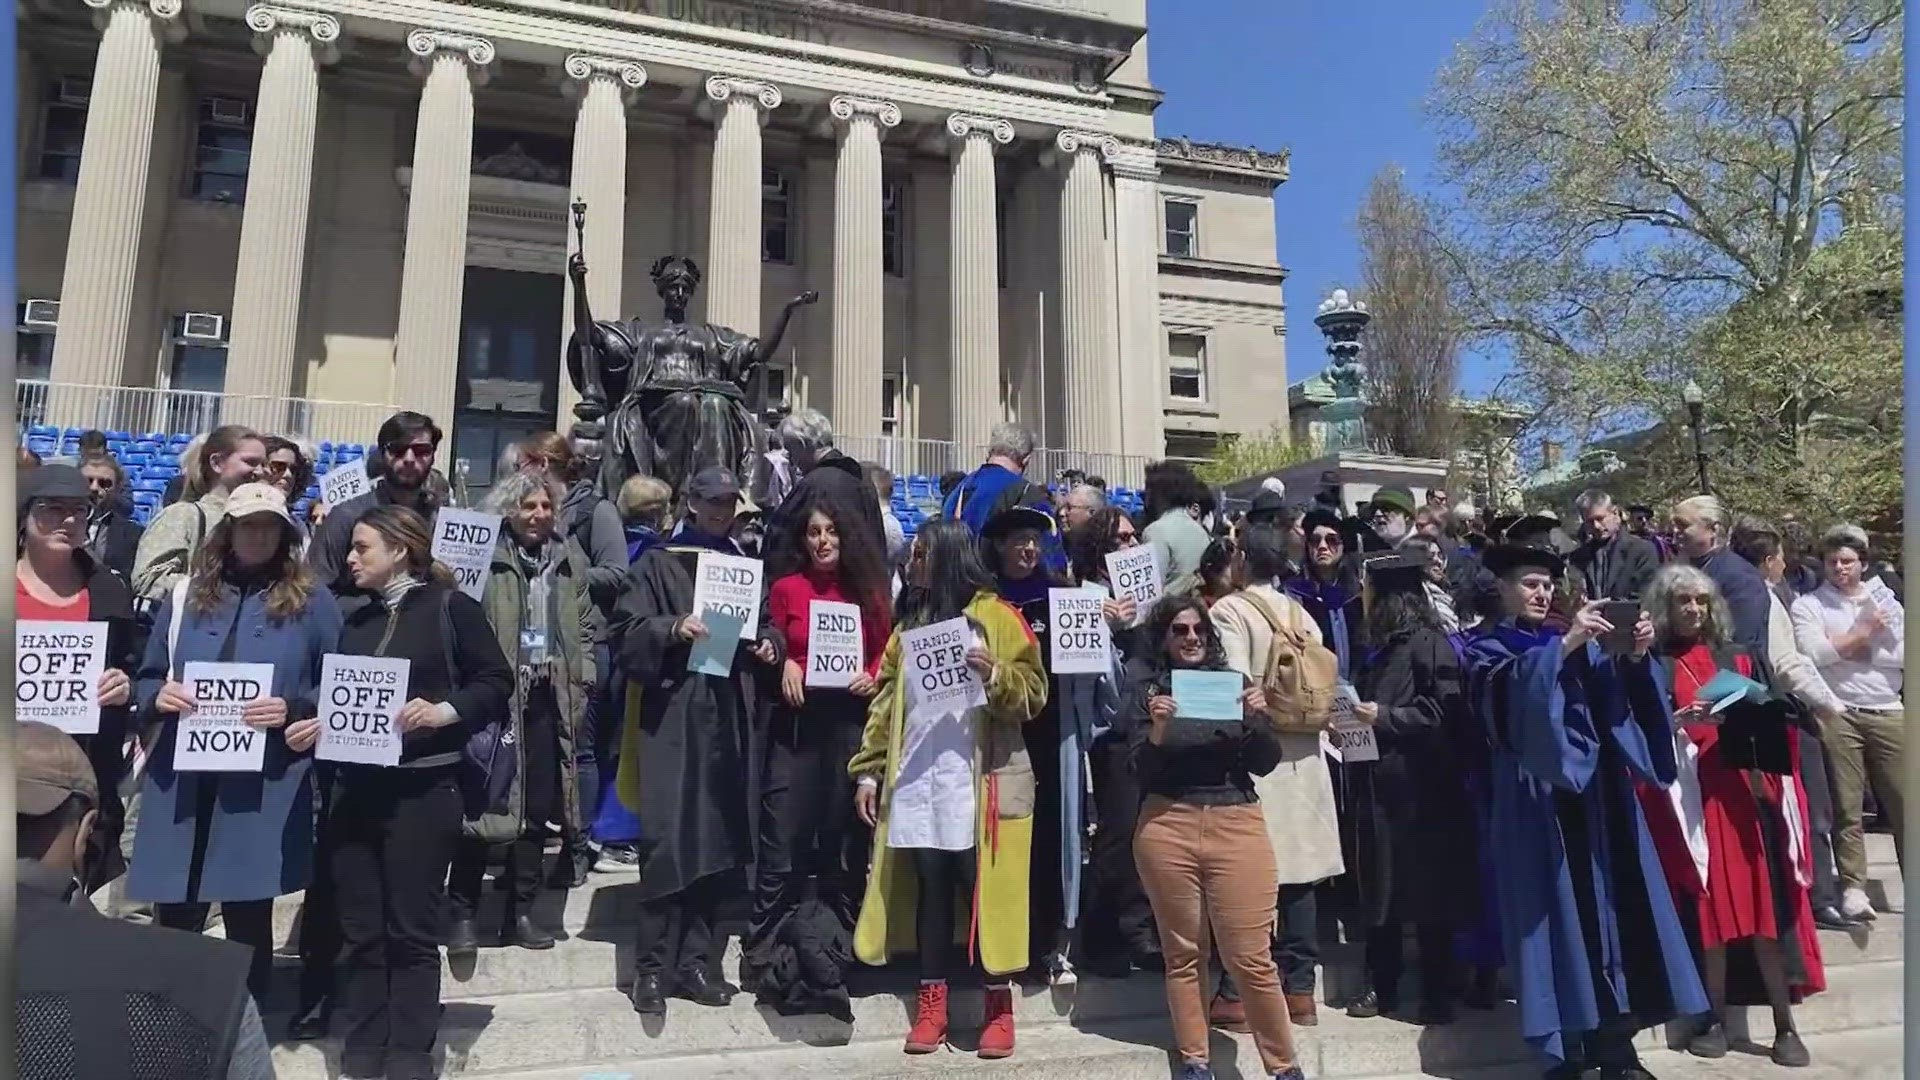 Several college campuses like Yale, Columbia and MIT marked the first day of Passover with pro-Palestine protests.